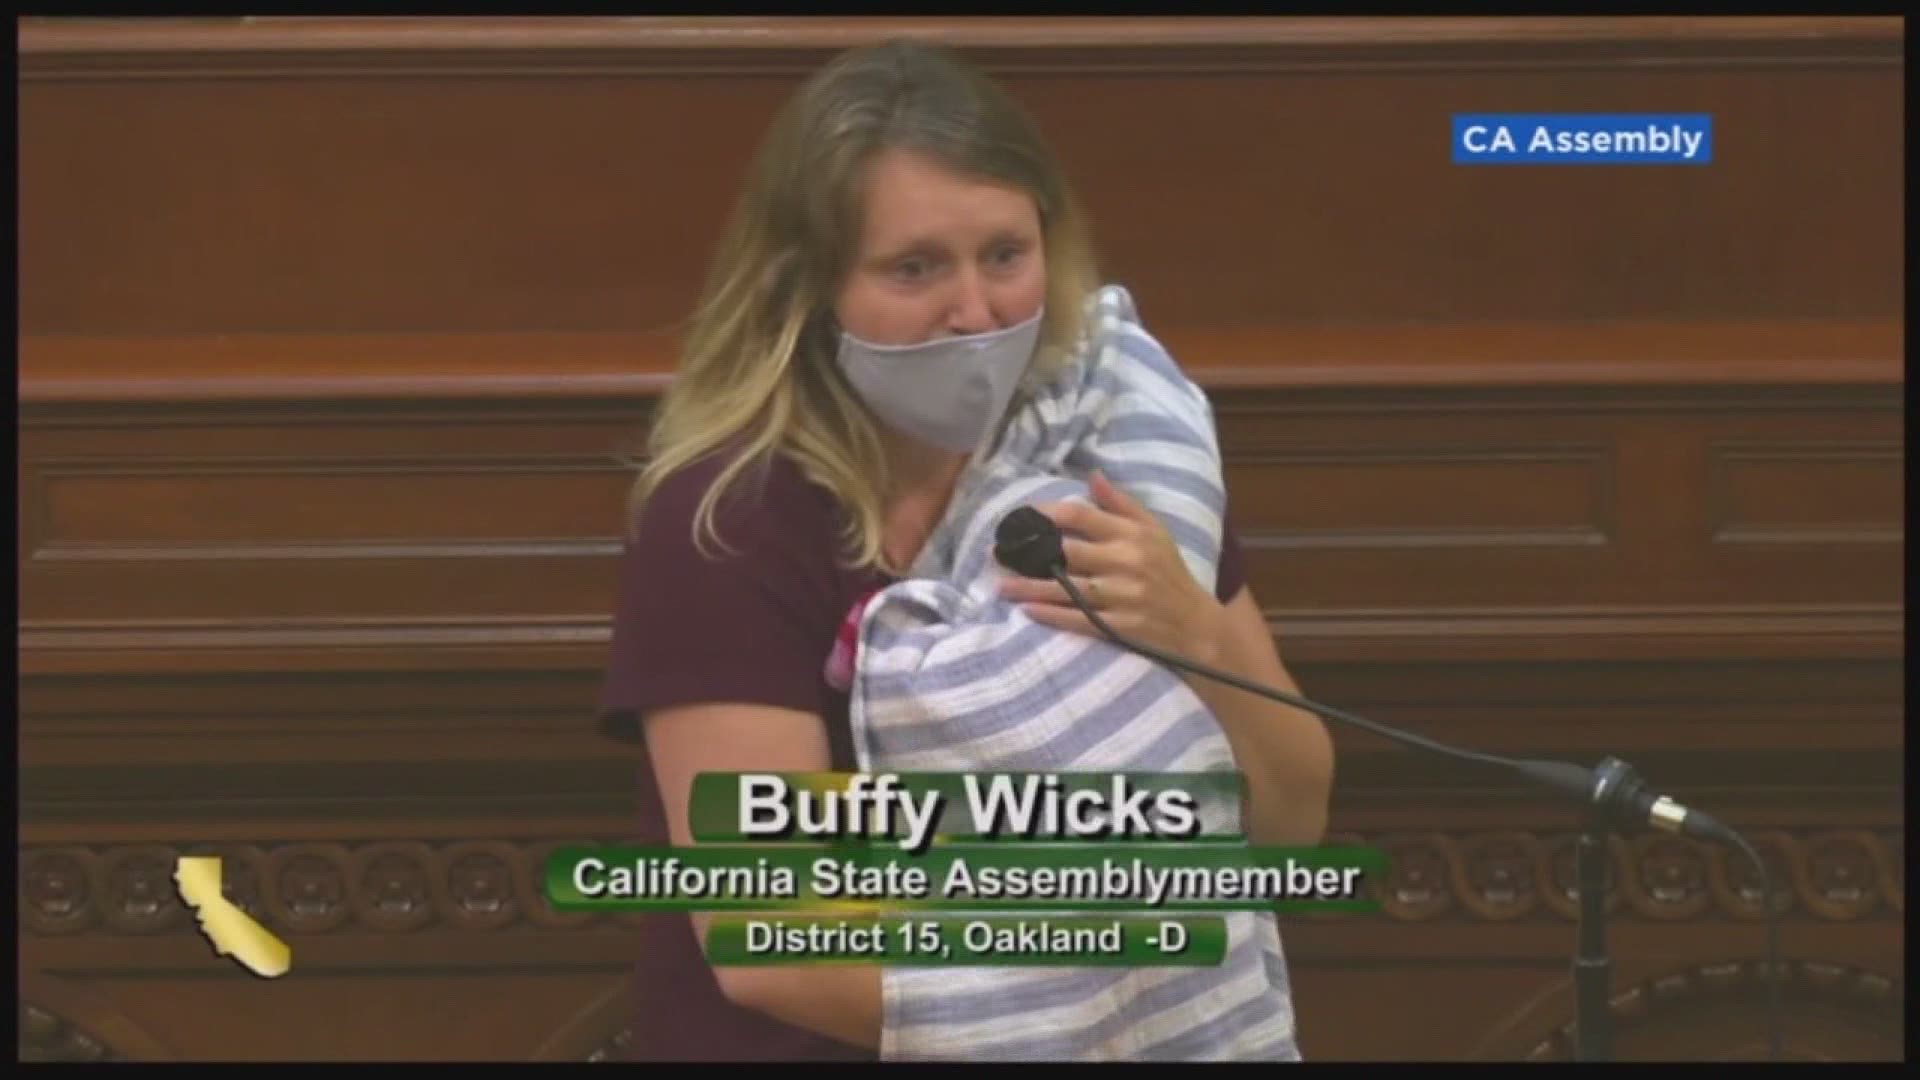 California lawmaker brings baby to vote, highlights challenges working mothers face